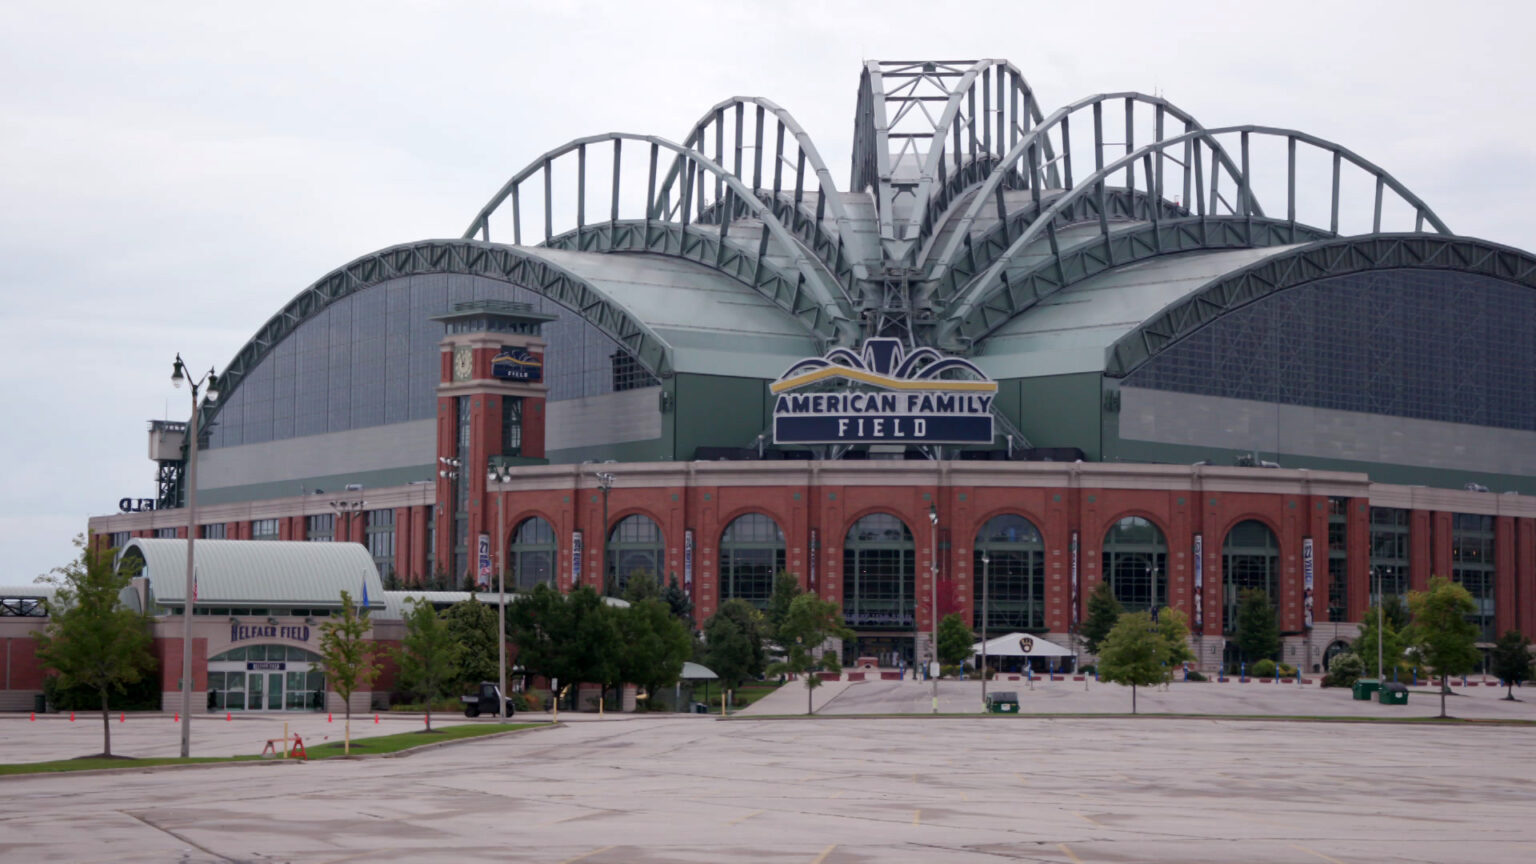 A retractable roof is in a closed position on top of a baseball stadium with a sign over its home plate entrance reading American Family Field, with an empty parking lots and trees in the foreground.